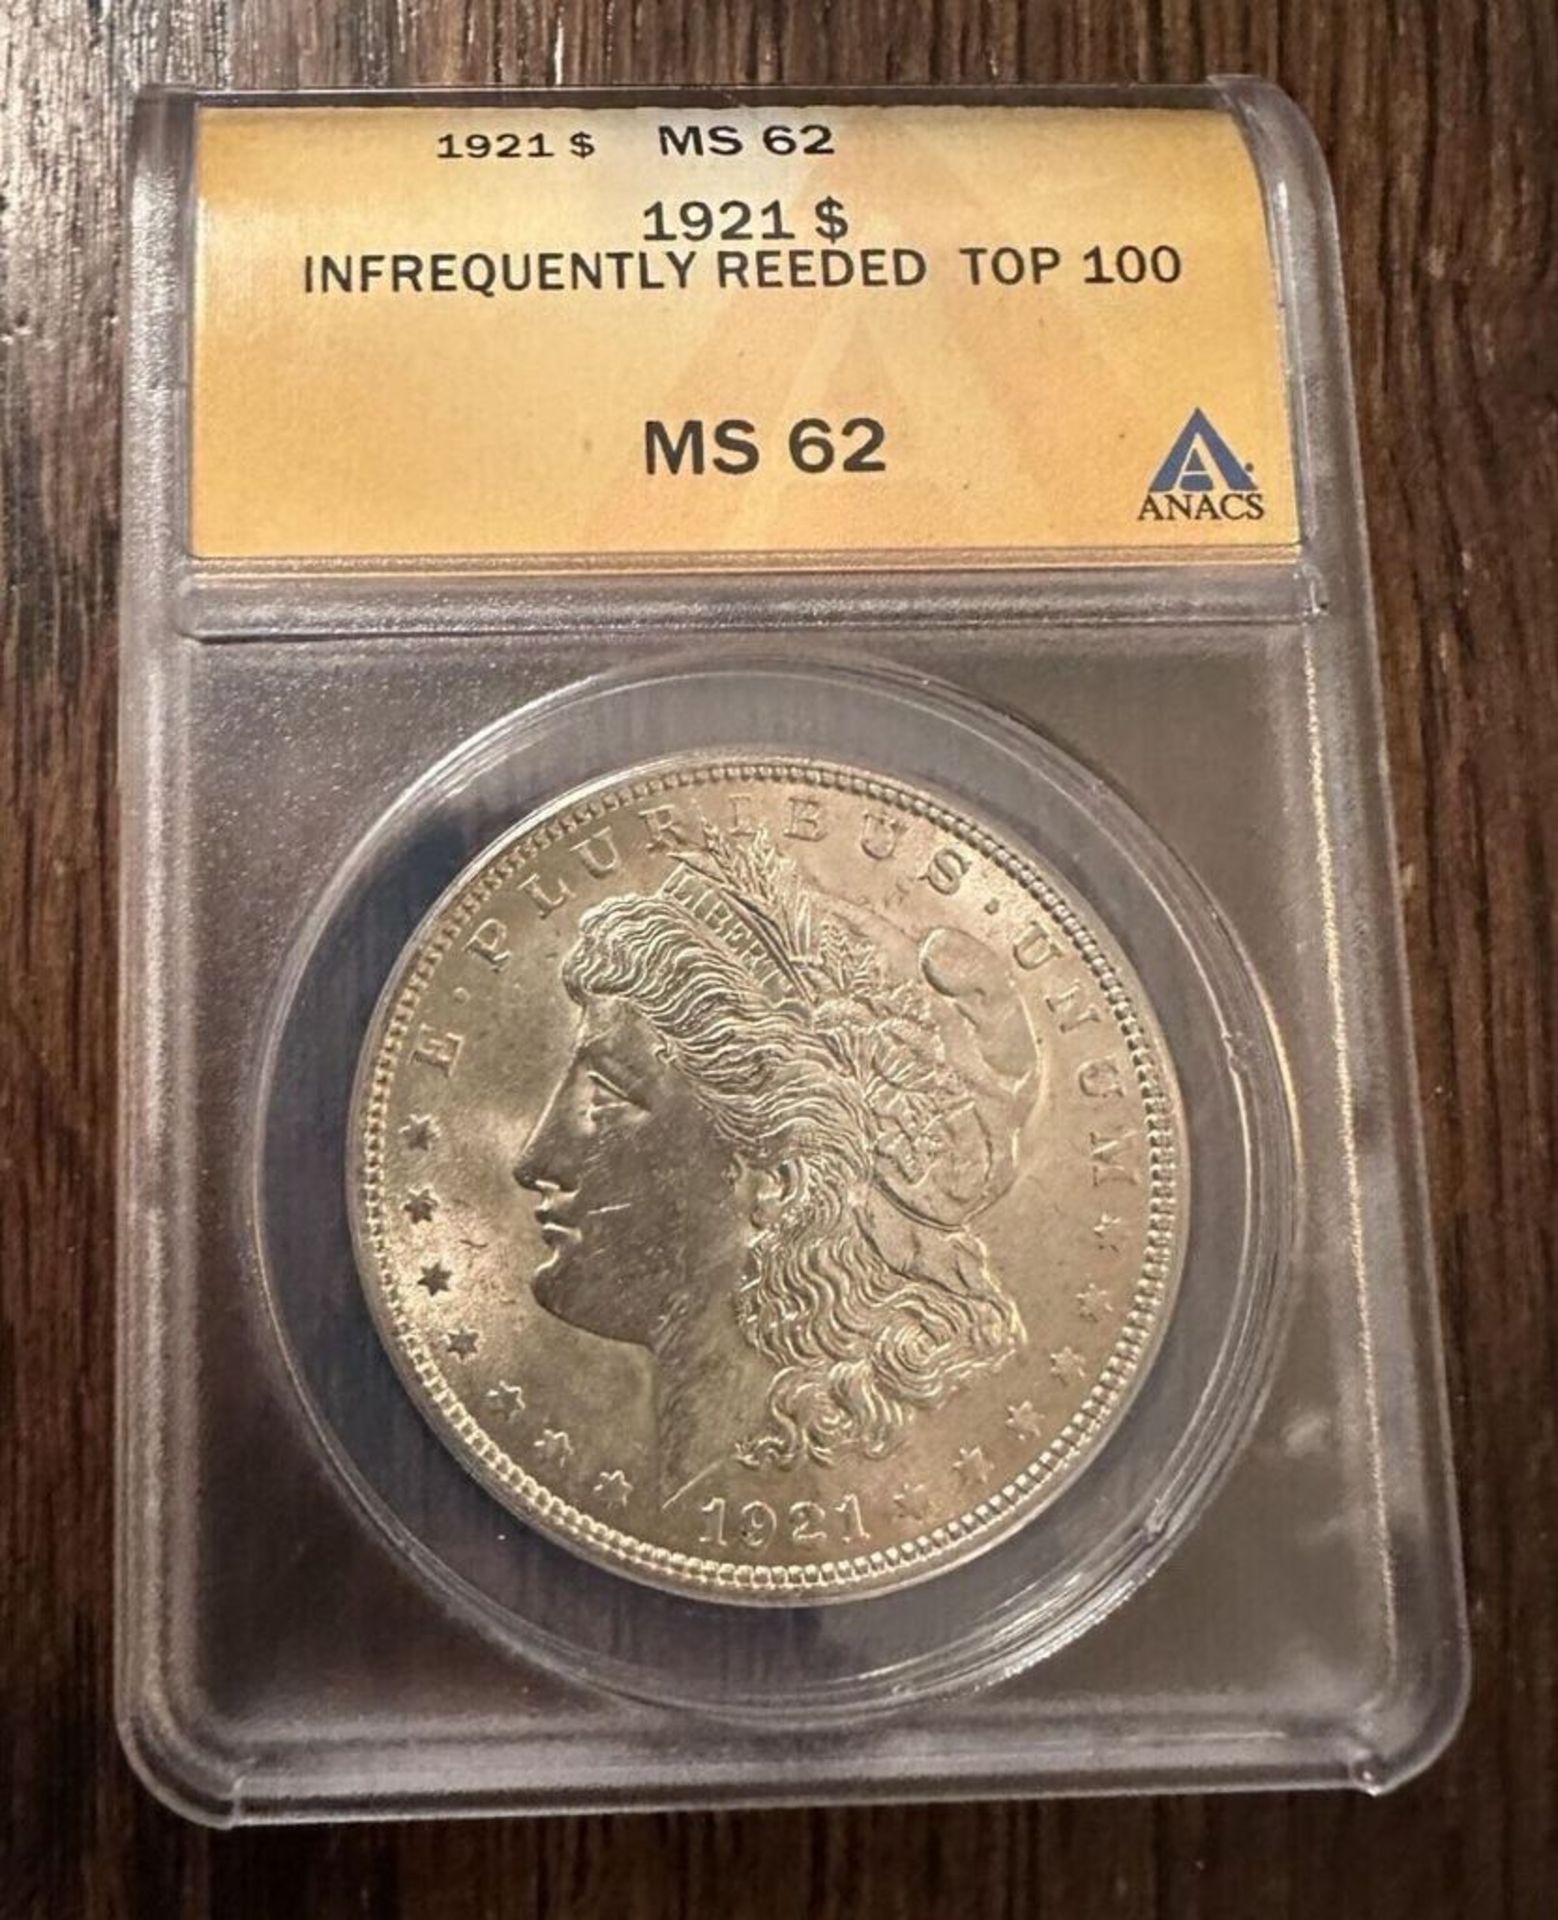 1921 $ MS 62 INFREQUENTLY REEDED TOP 100 COIN